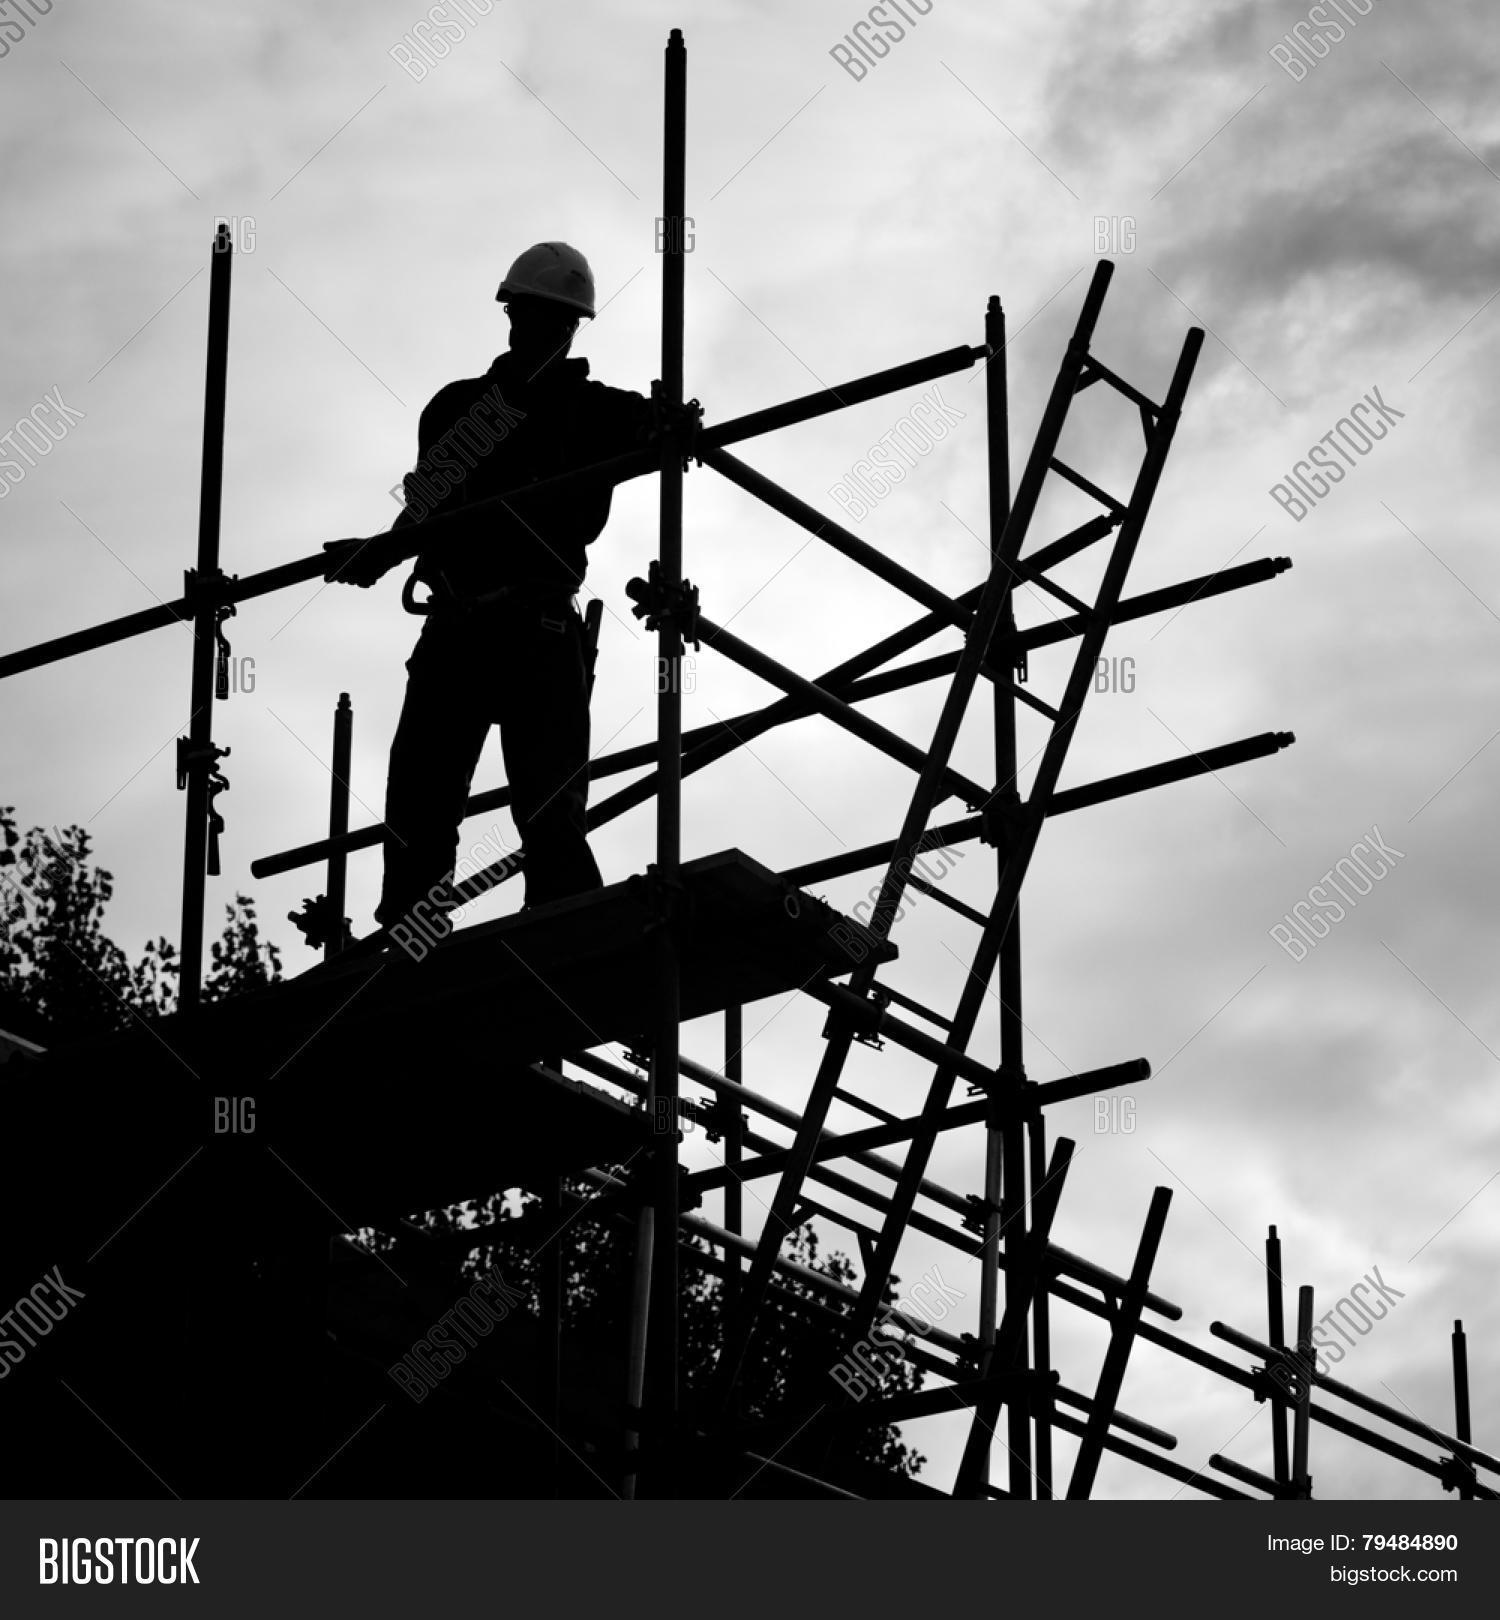 Silhouette Construction Worker Image & Photo | Bigstock